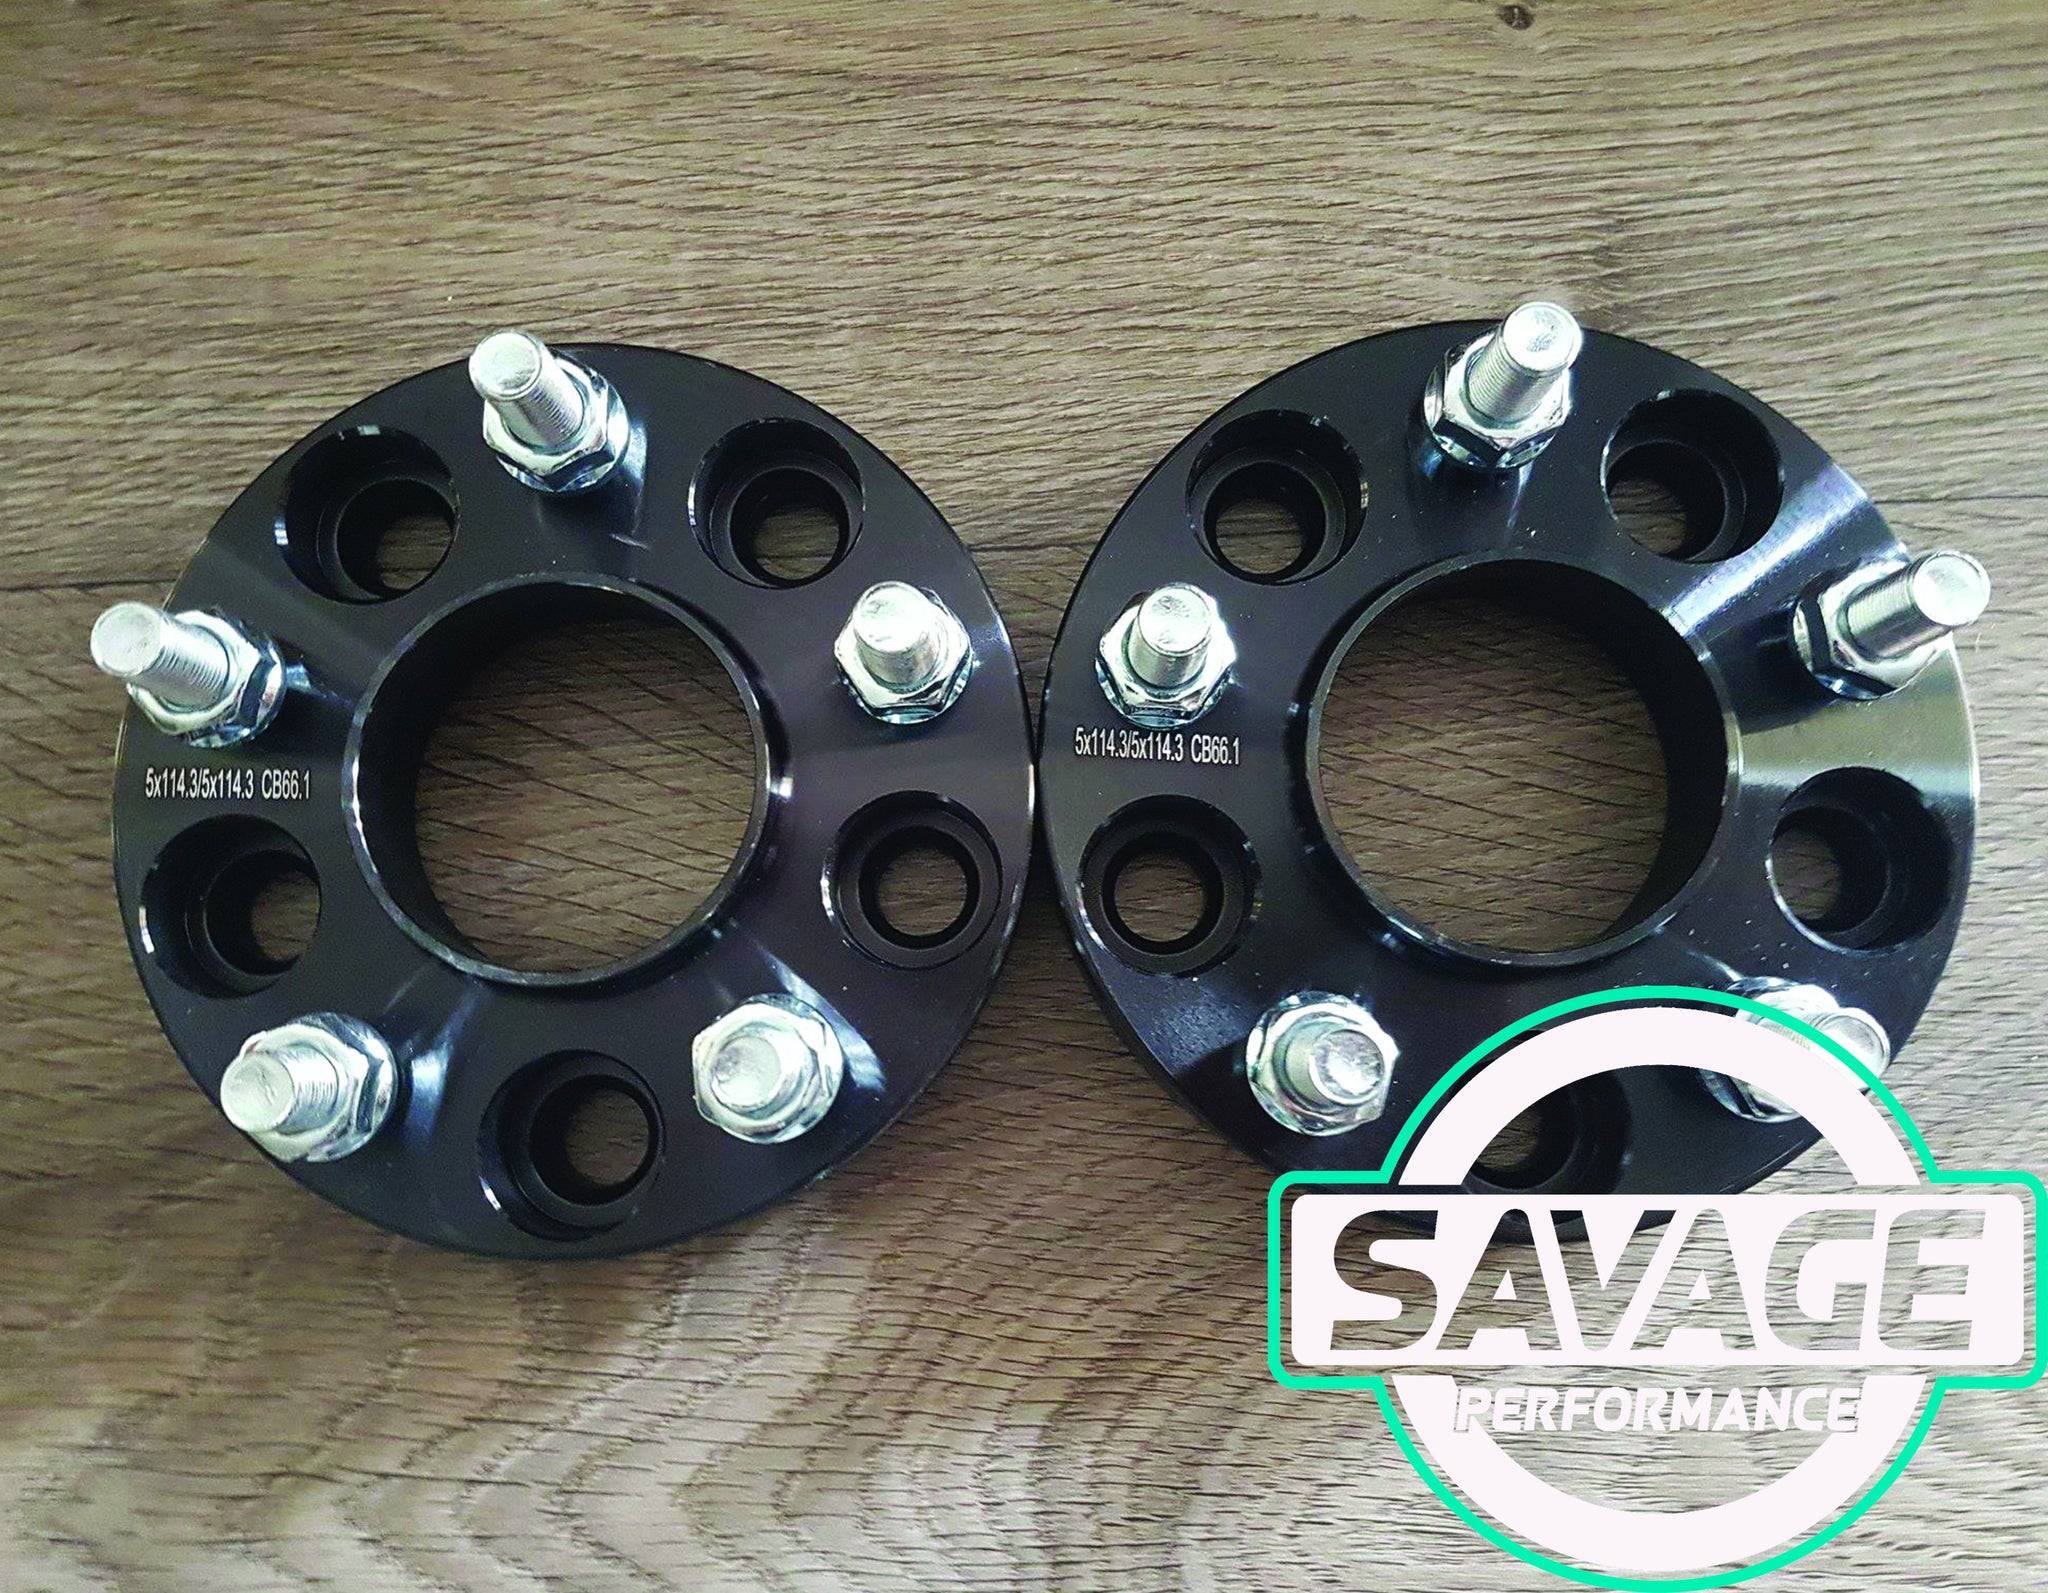 5x120 25mm Wheel Spacers HOLDEN COMMODORE VE VF *Savage Performance*